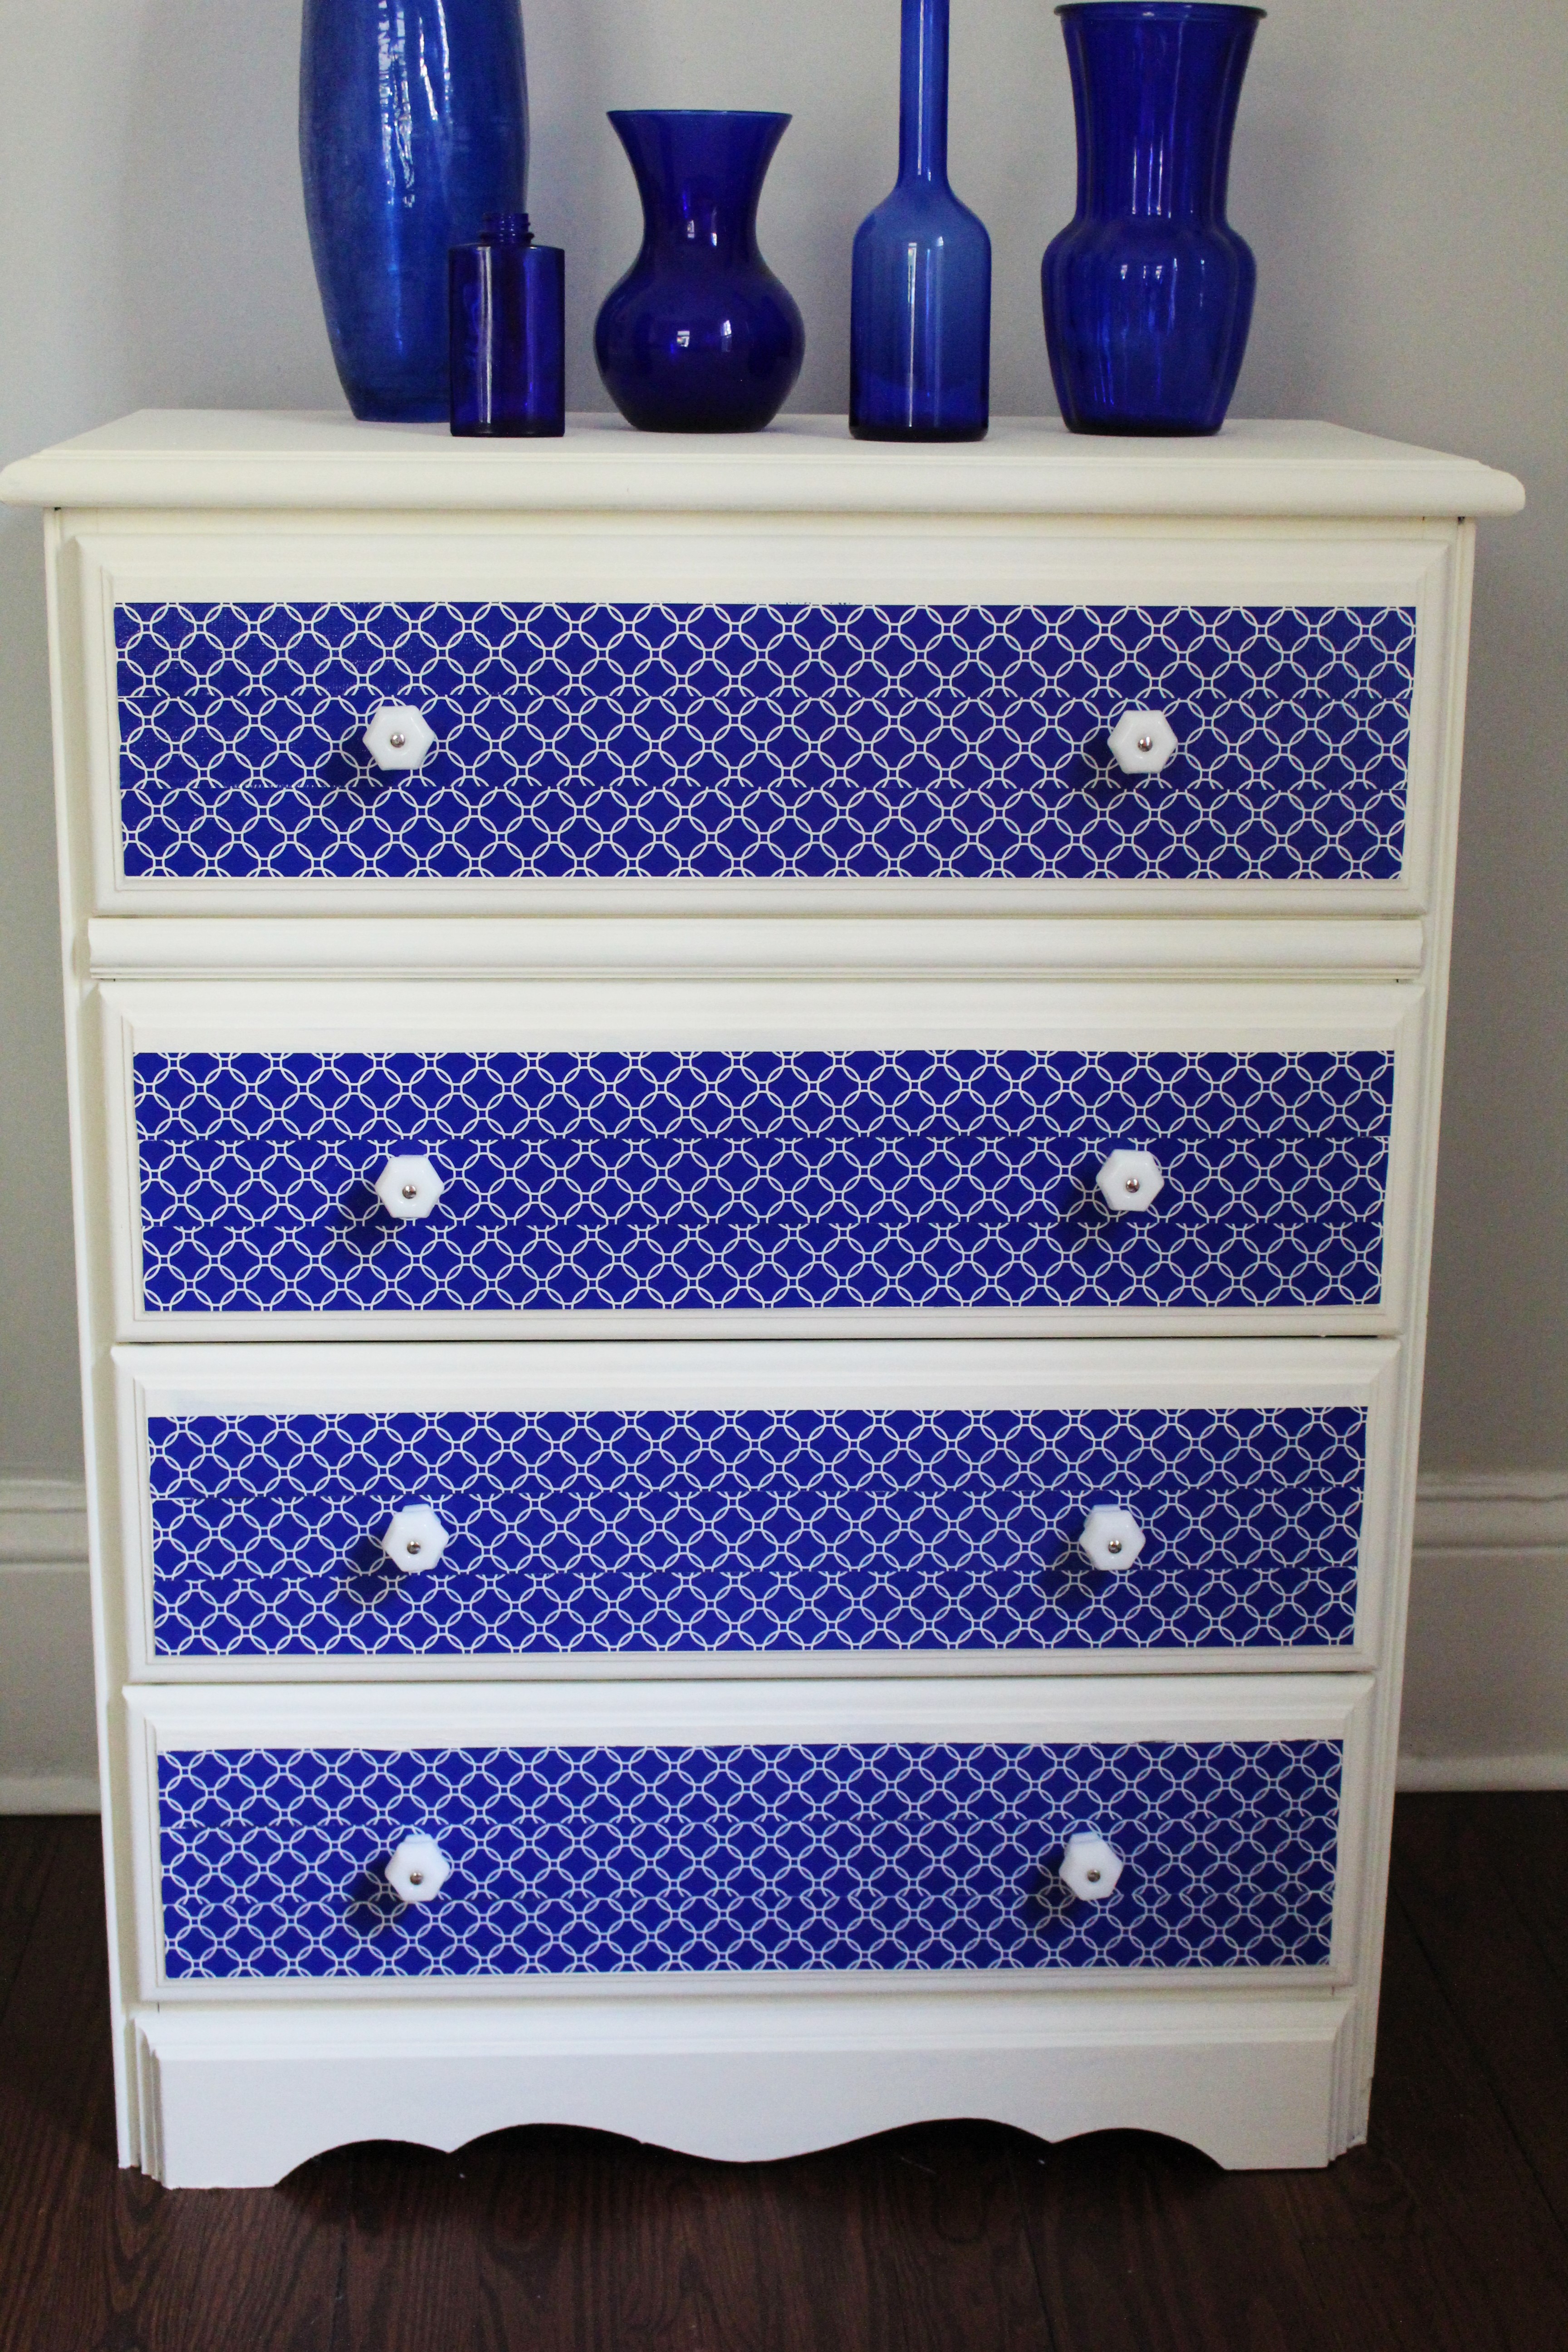 Trash to Treasure Dresser Transformation with chalk paint, duct tape, and D. Lawless Milk Glass knobs